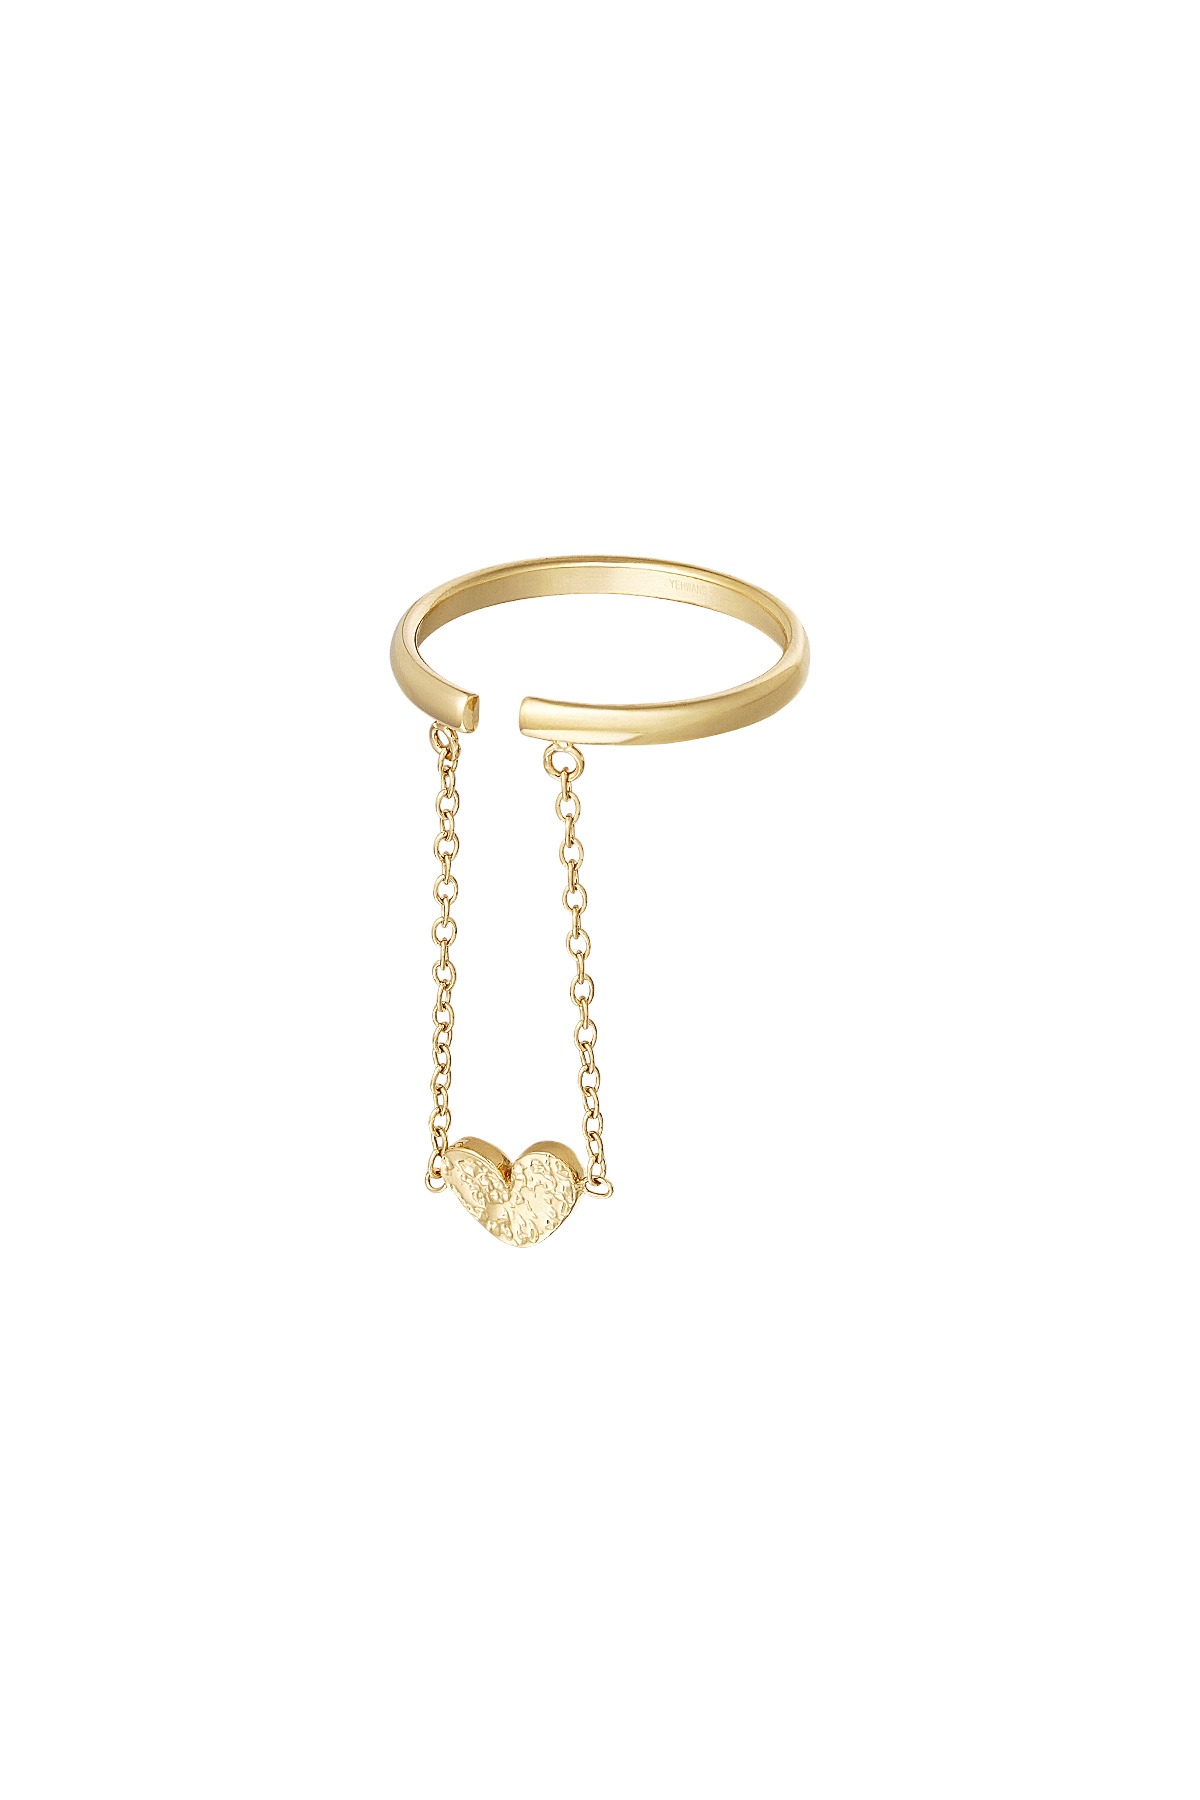 Ring heart with chain - gold